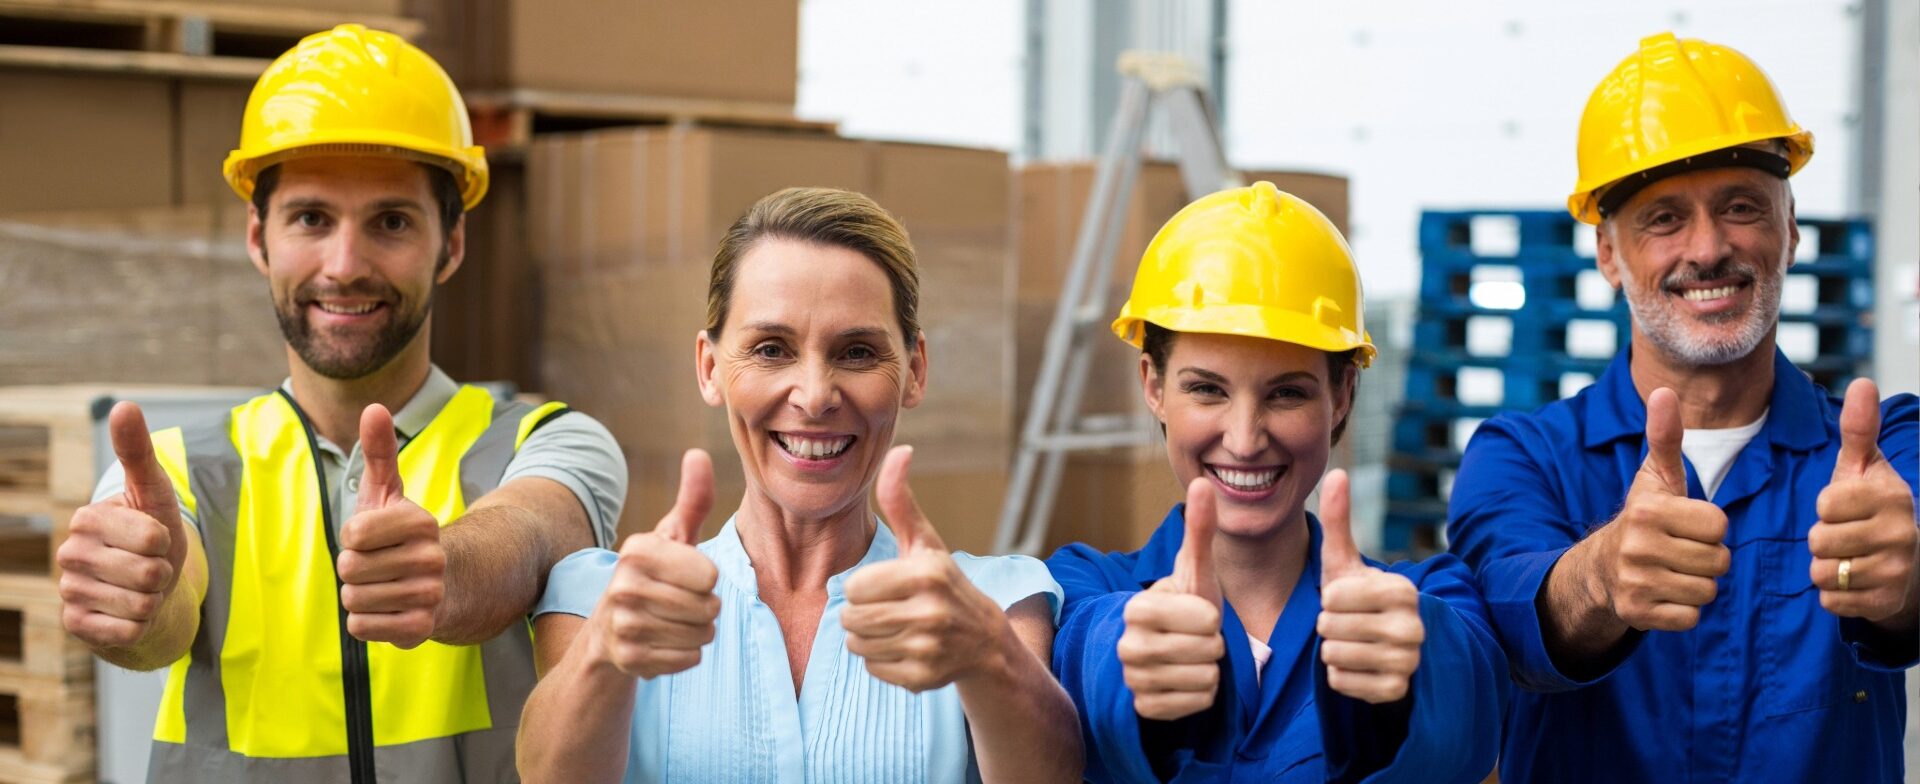 Group of smiling construction workers showing thumbs up